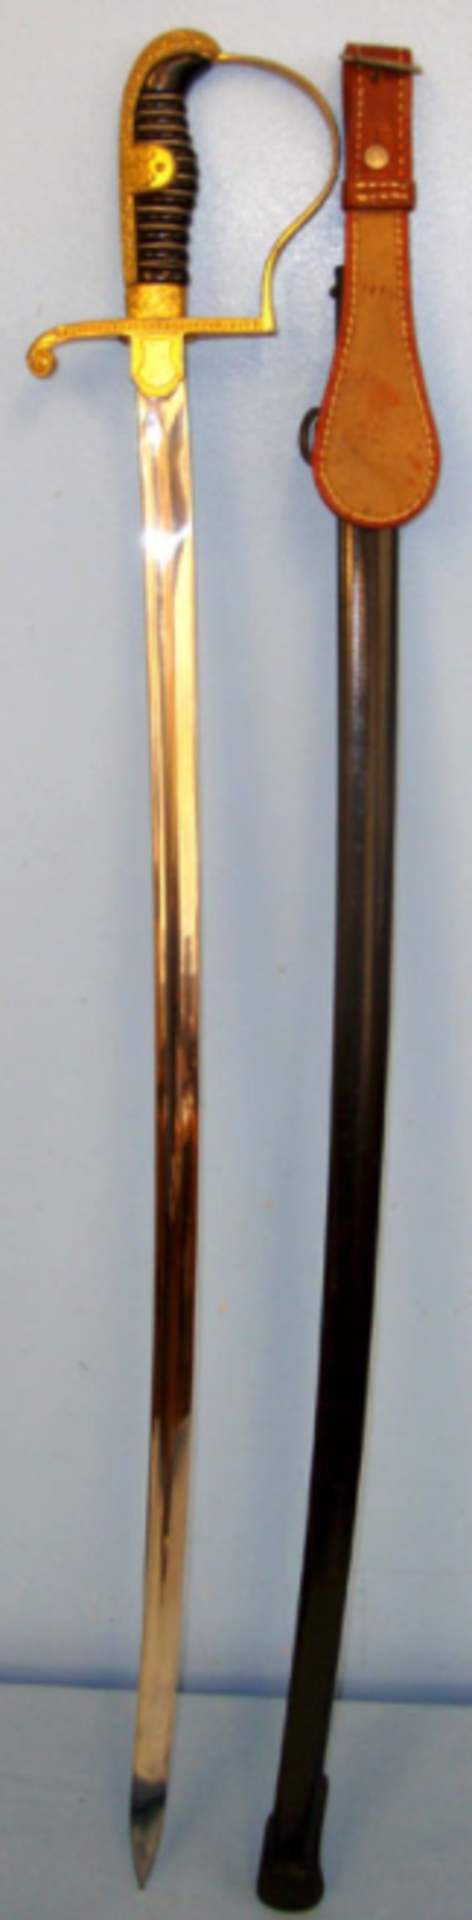 MINT, WW2 Nazi German Officers Sword By E. Pack & Sohne Solingen And Scabbard - Image 3 of 3